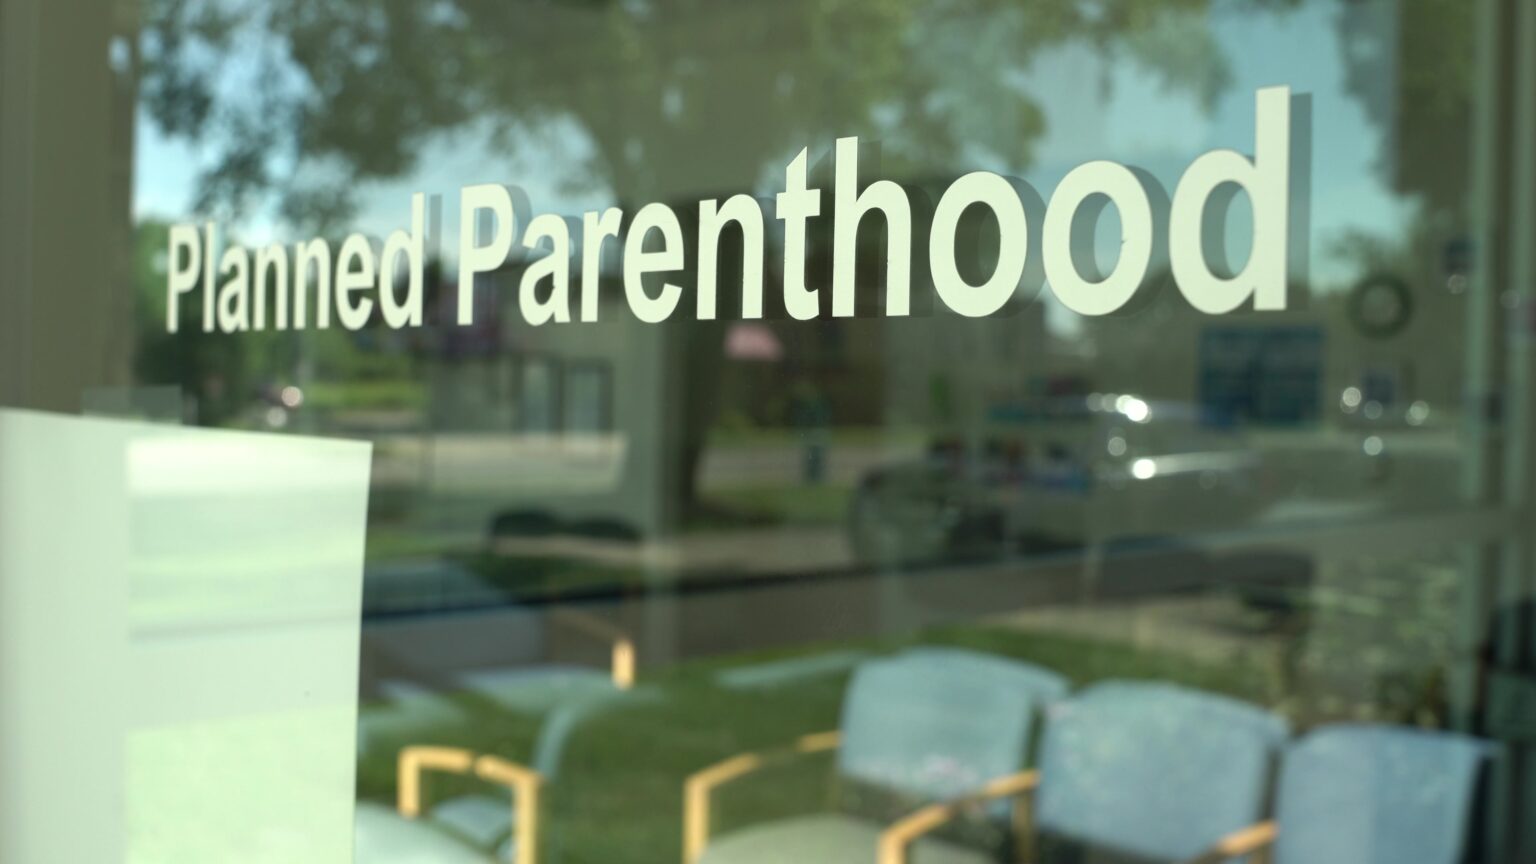 A stencil sign on a window reads Planned Parenthood with empty chairs in a waiting room visible through the glass.